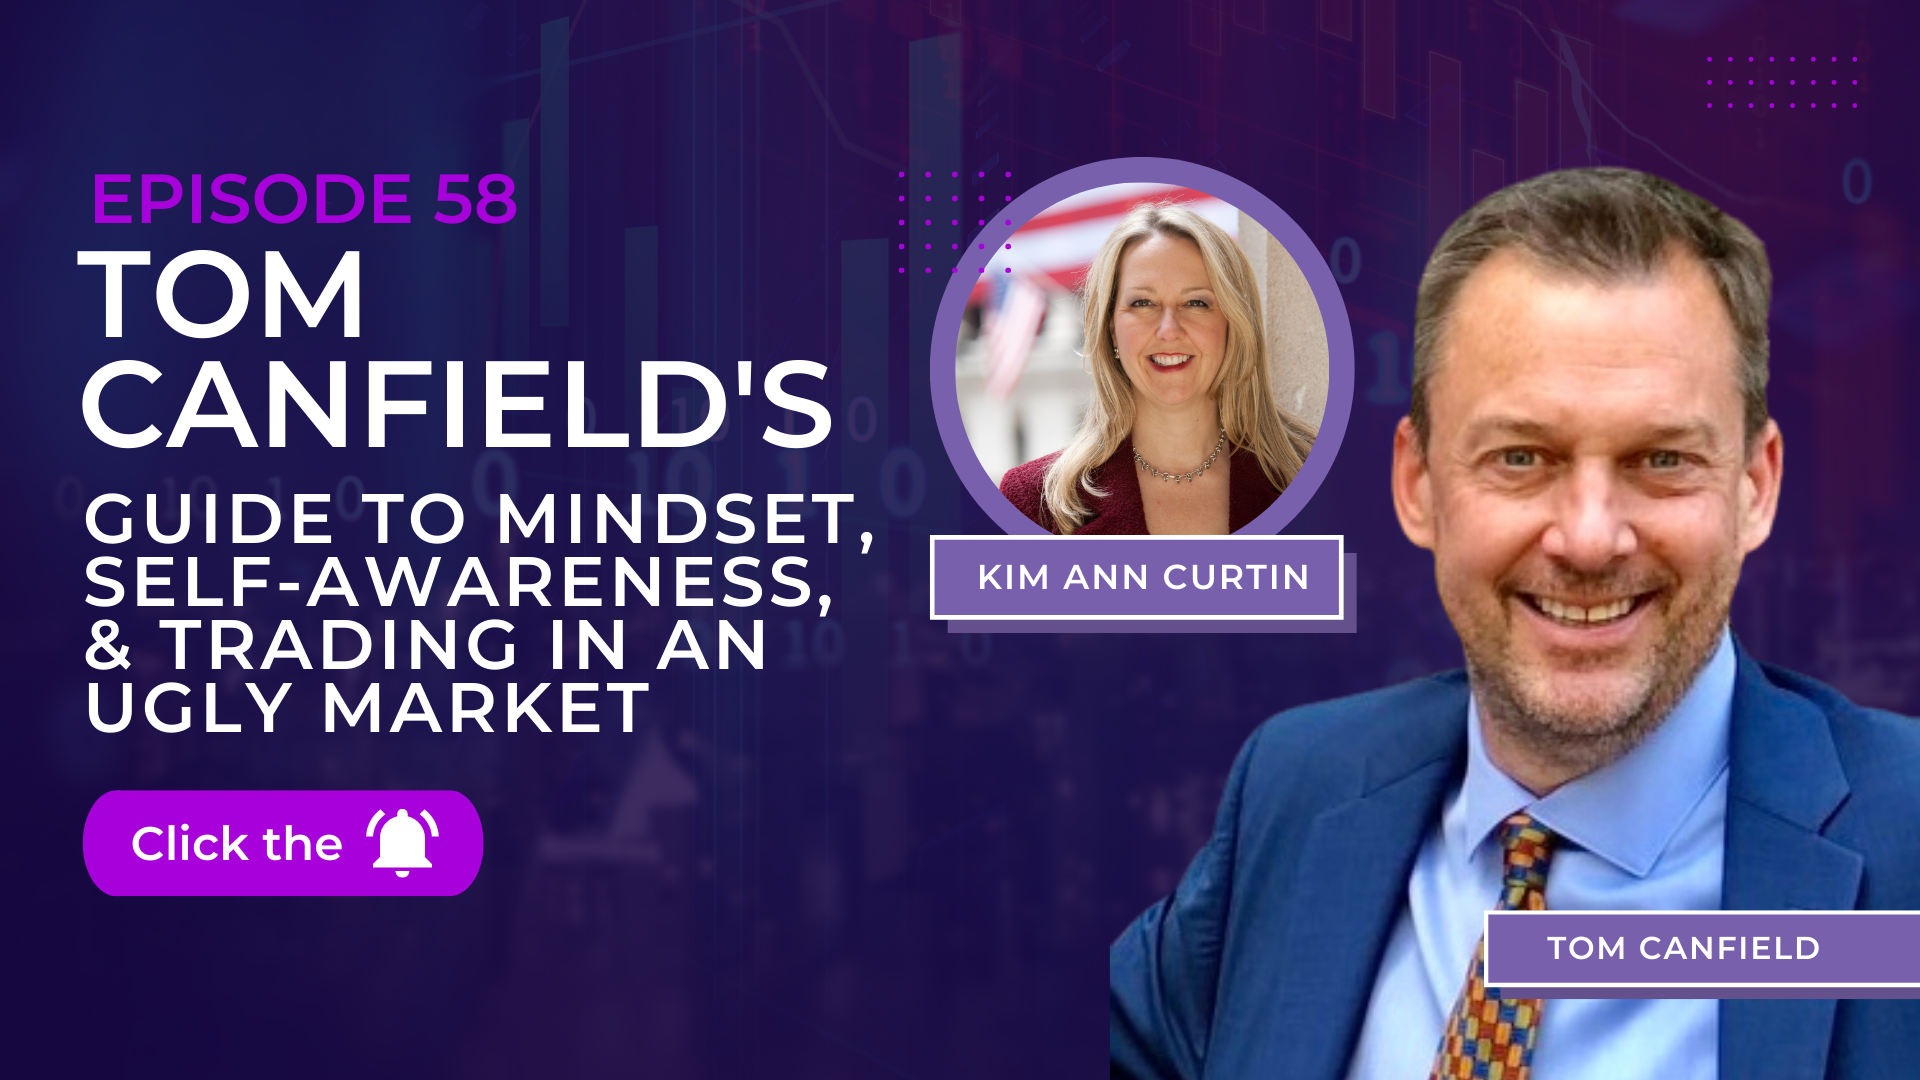 Episode 58: Tom Canfield’s Guide to Mindset, Self-Awareness, & Trading in An Ugly Market